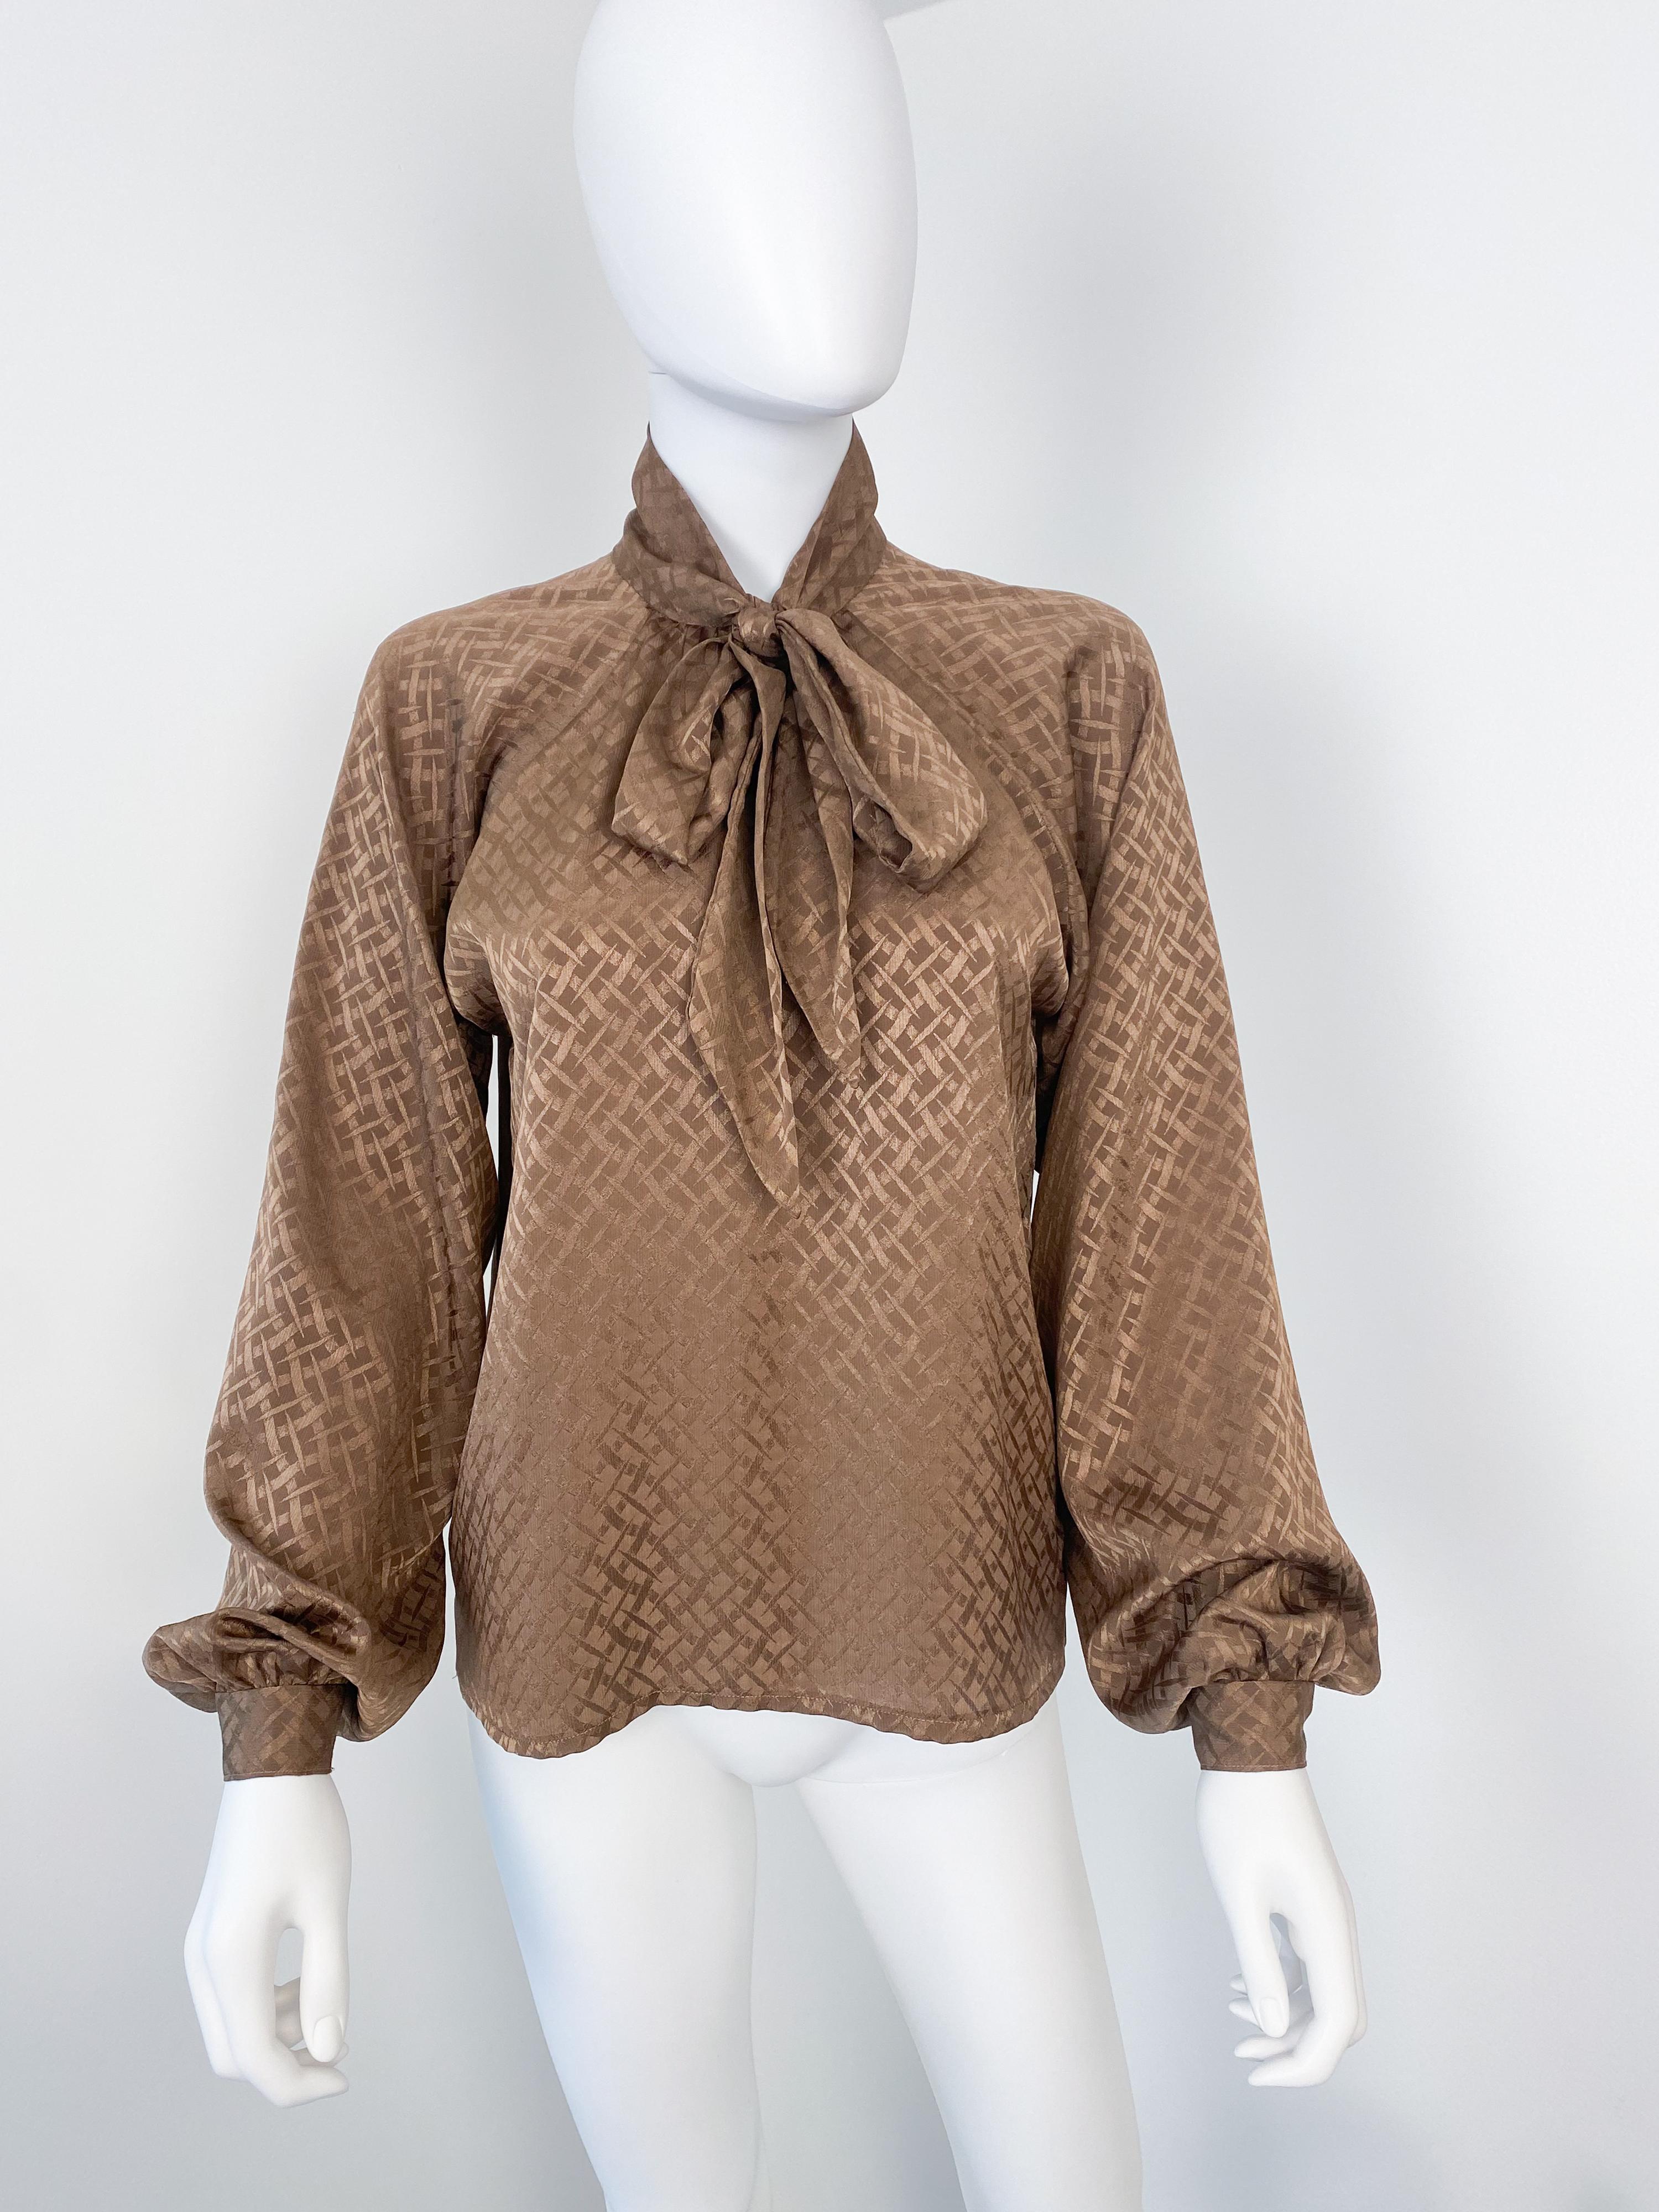 Vintage 1980s Silky Polyester Bow Blouse Top Brown Geometric Print Size 6/8 In Excellent Condition For Sale In Atlanta, GA